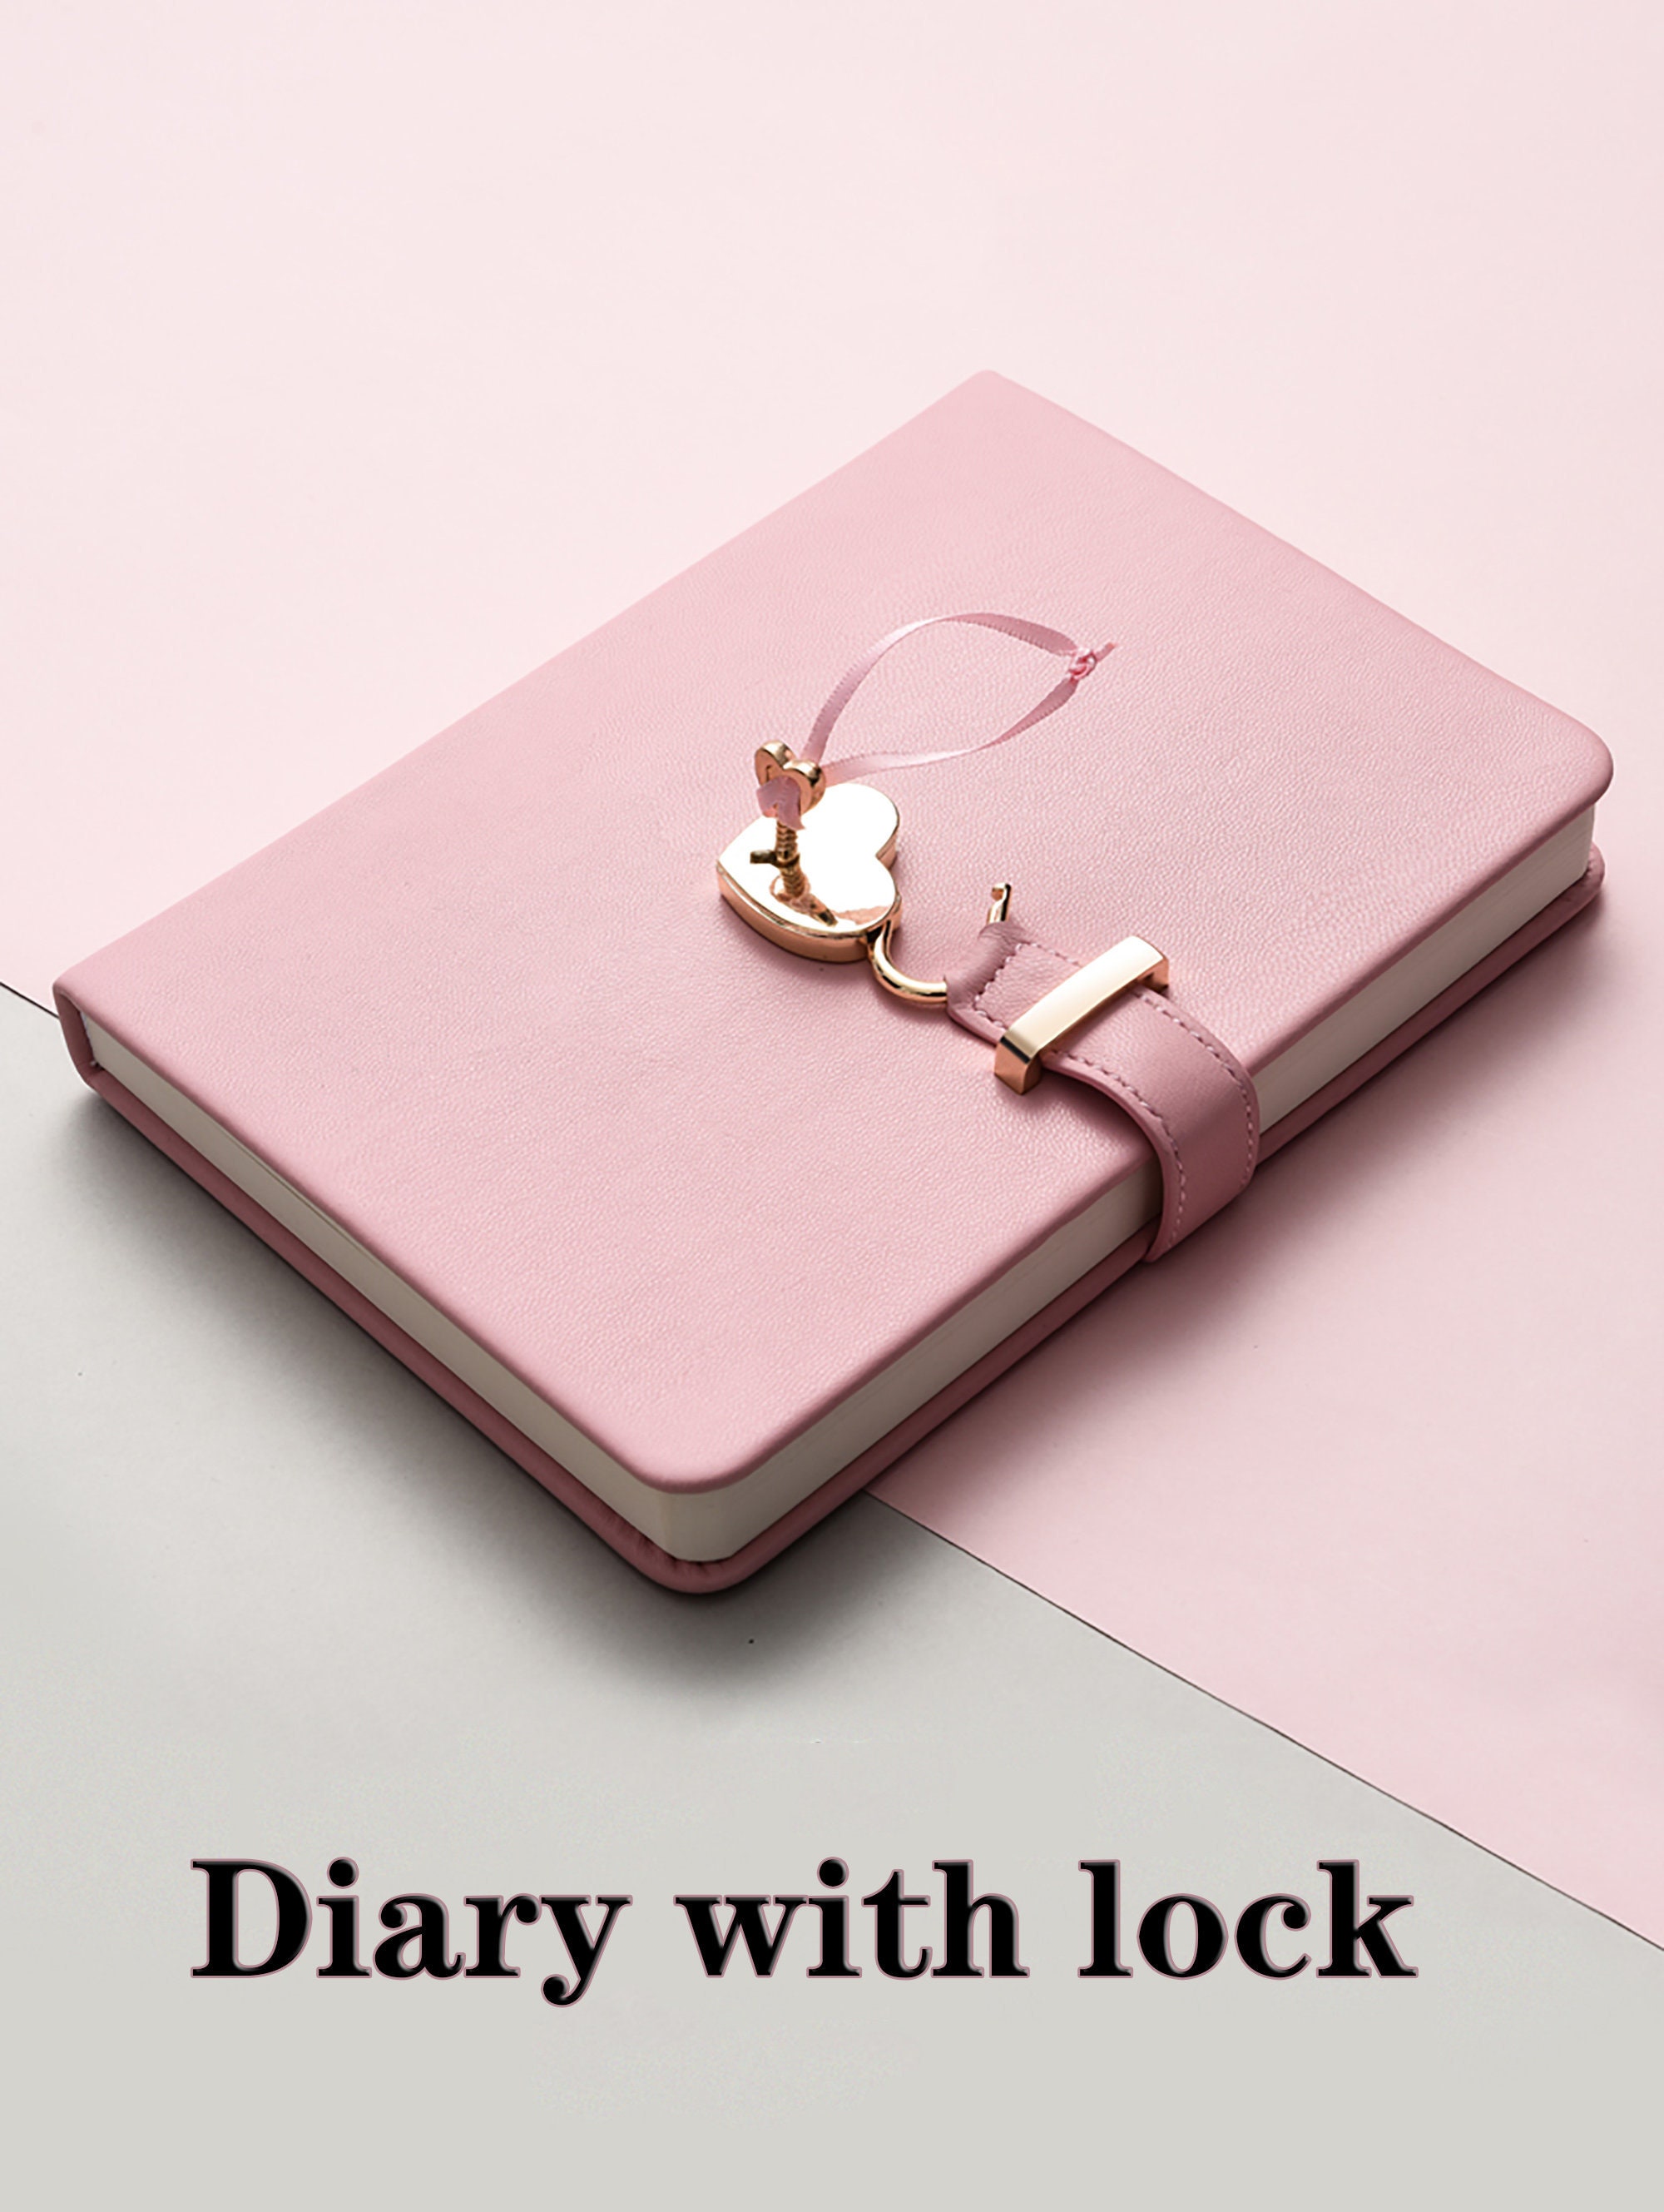 Heart Shaped Lock Diary with Key for Girls PU Leather Cover Journal Personal Org